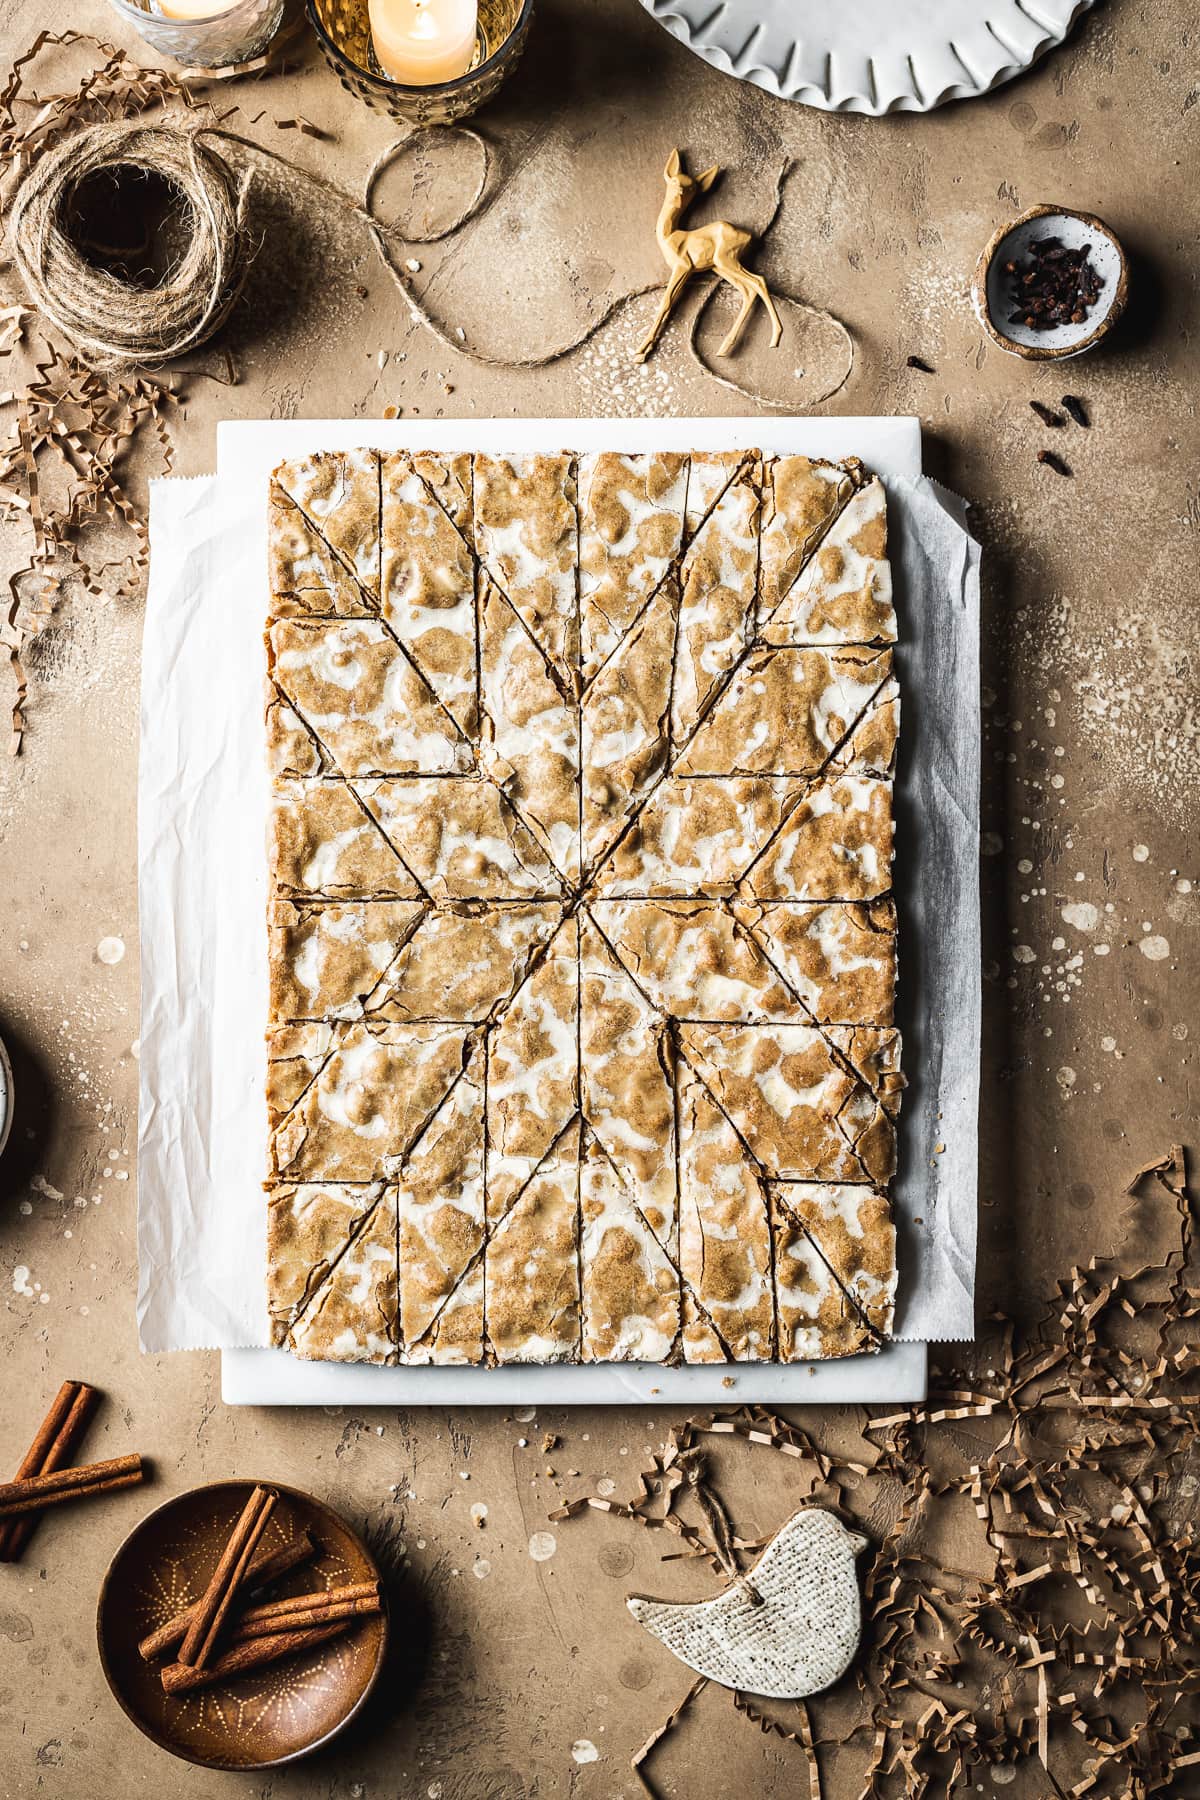 German cookies on a marble block and white parchment paper, cut into a decorative holiday star pattern. The marble block rests on a tan stone surface and is surrounded by cinnamon sticks, cloves, a votive candle, brown twine, holiday figurines and more cookies.